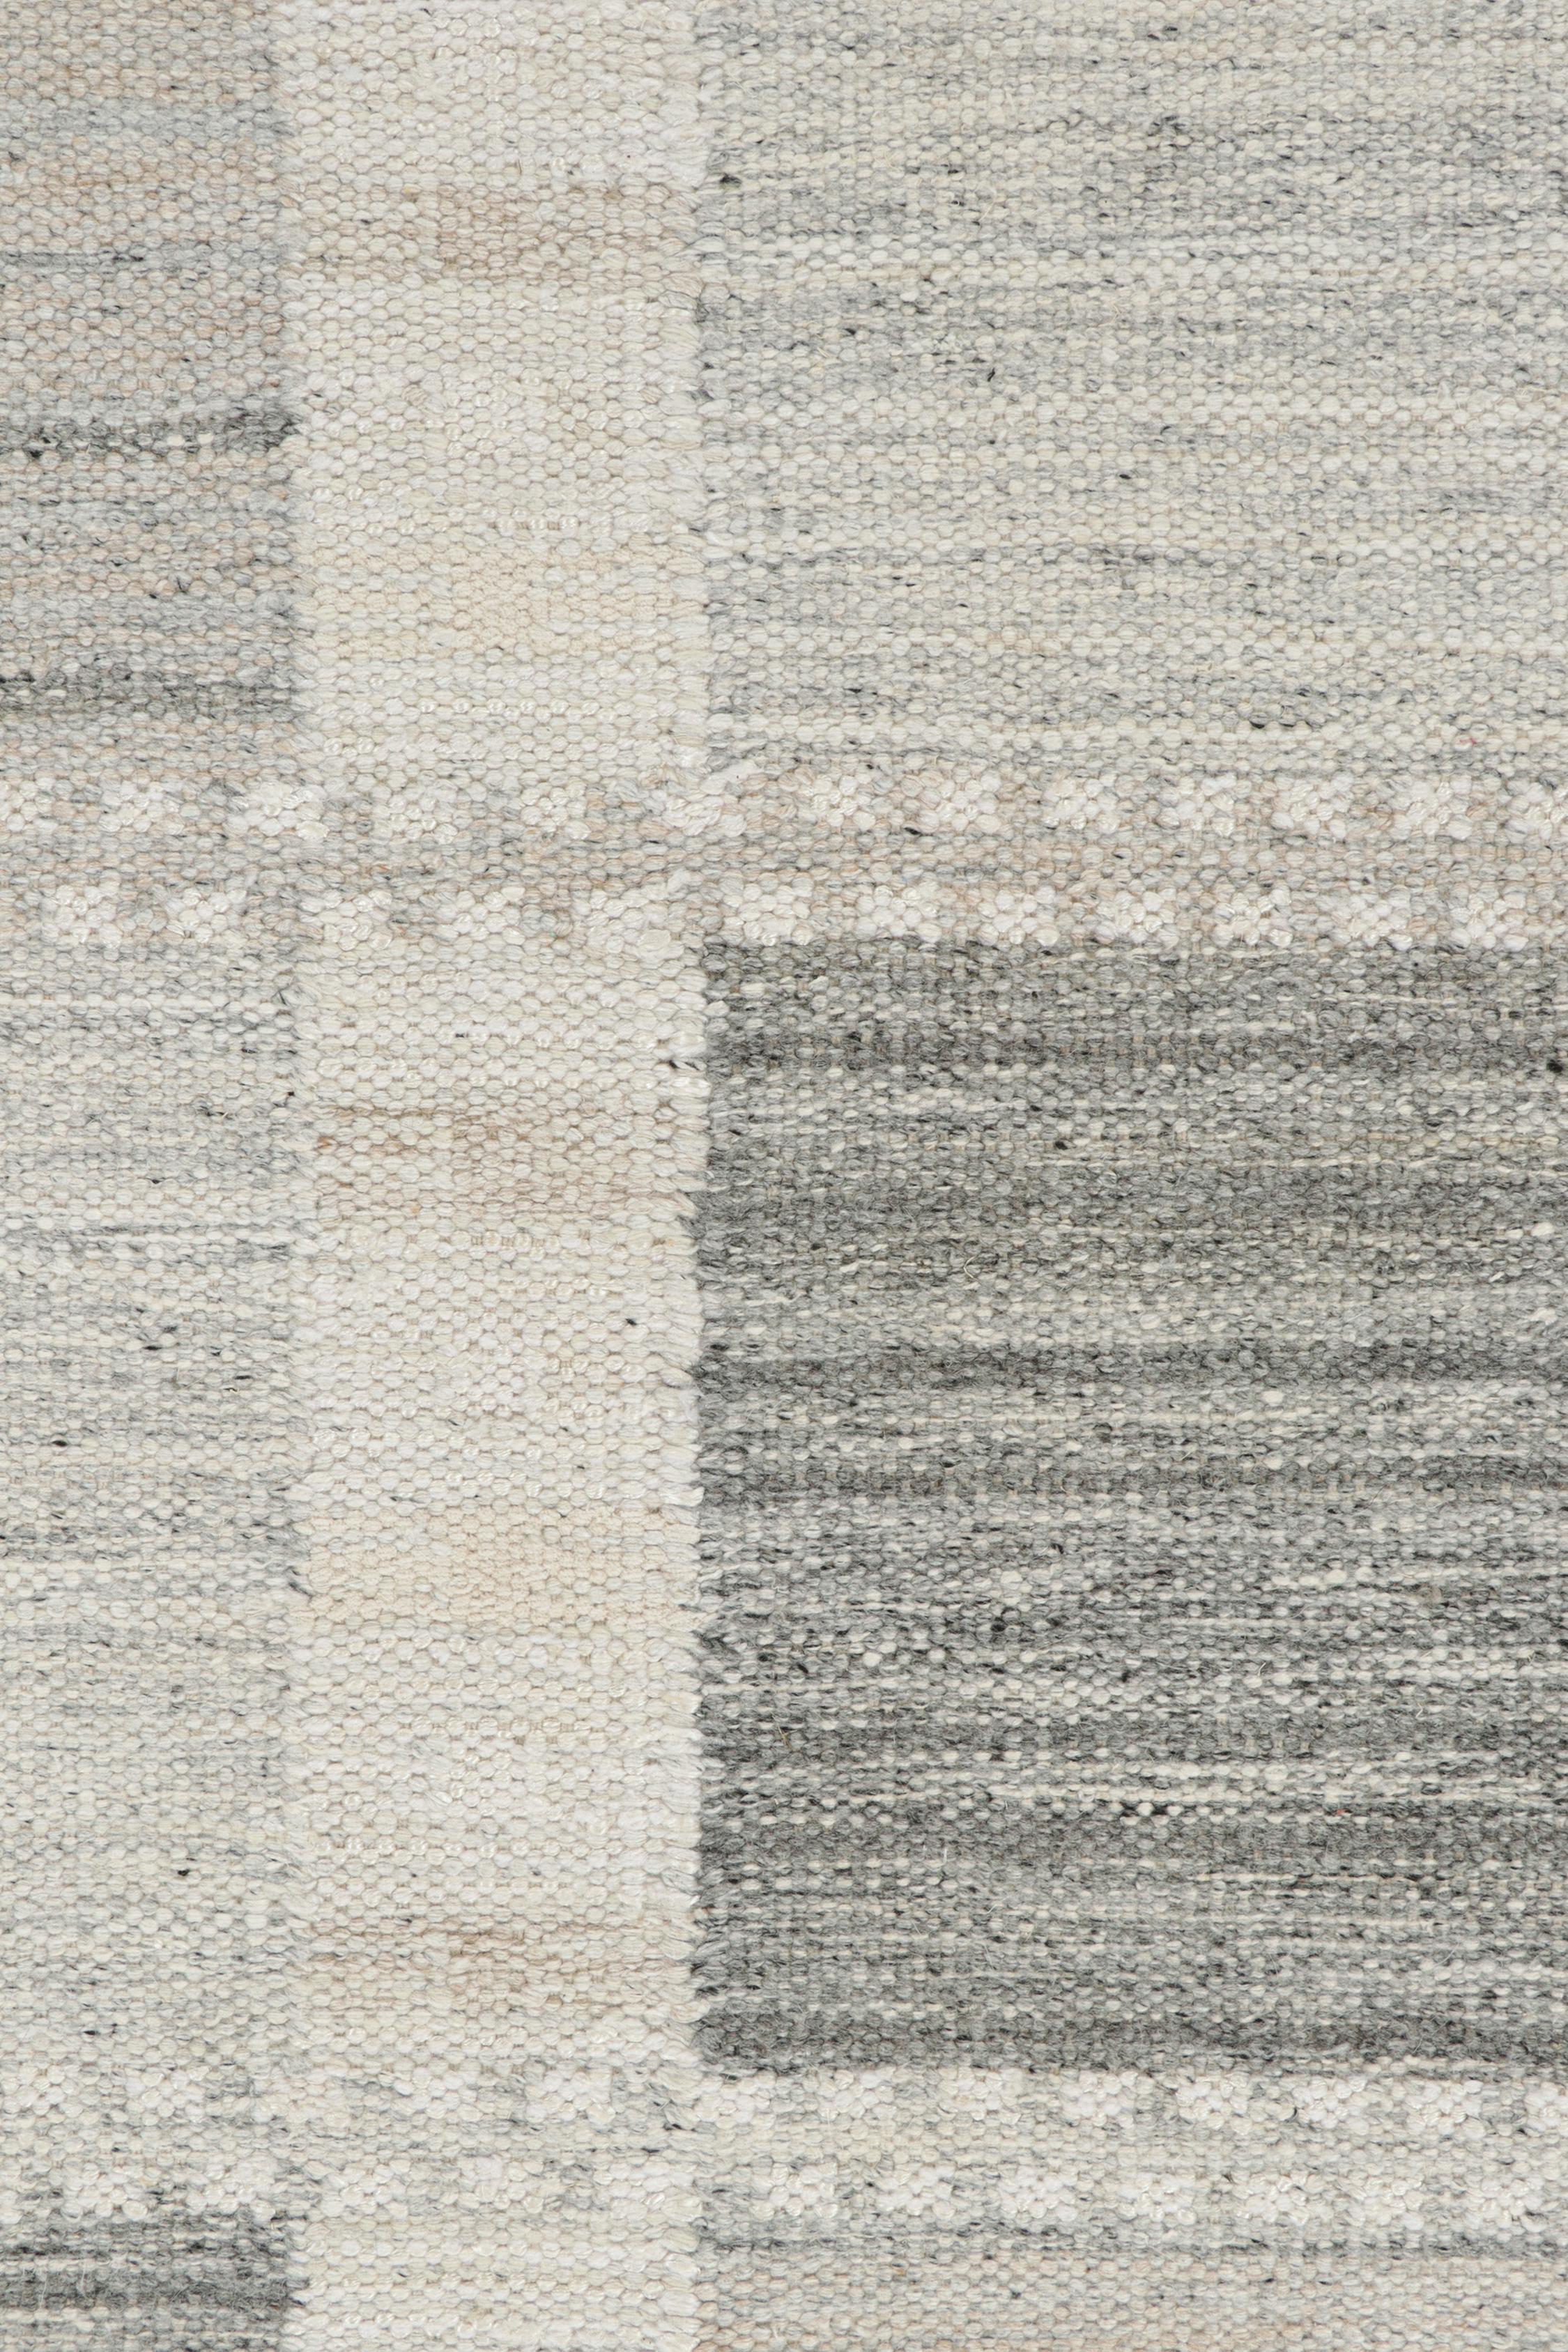 Rug & Kilim’s Scandinavian Style Kilim runner with Patterns in White & Grey In New Condition For Sale In Long Island City, NY